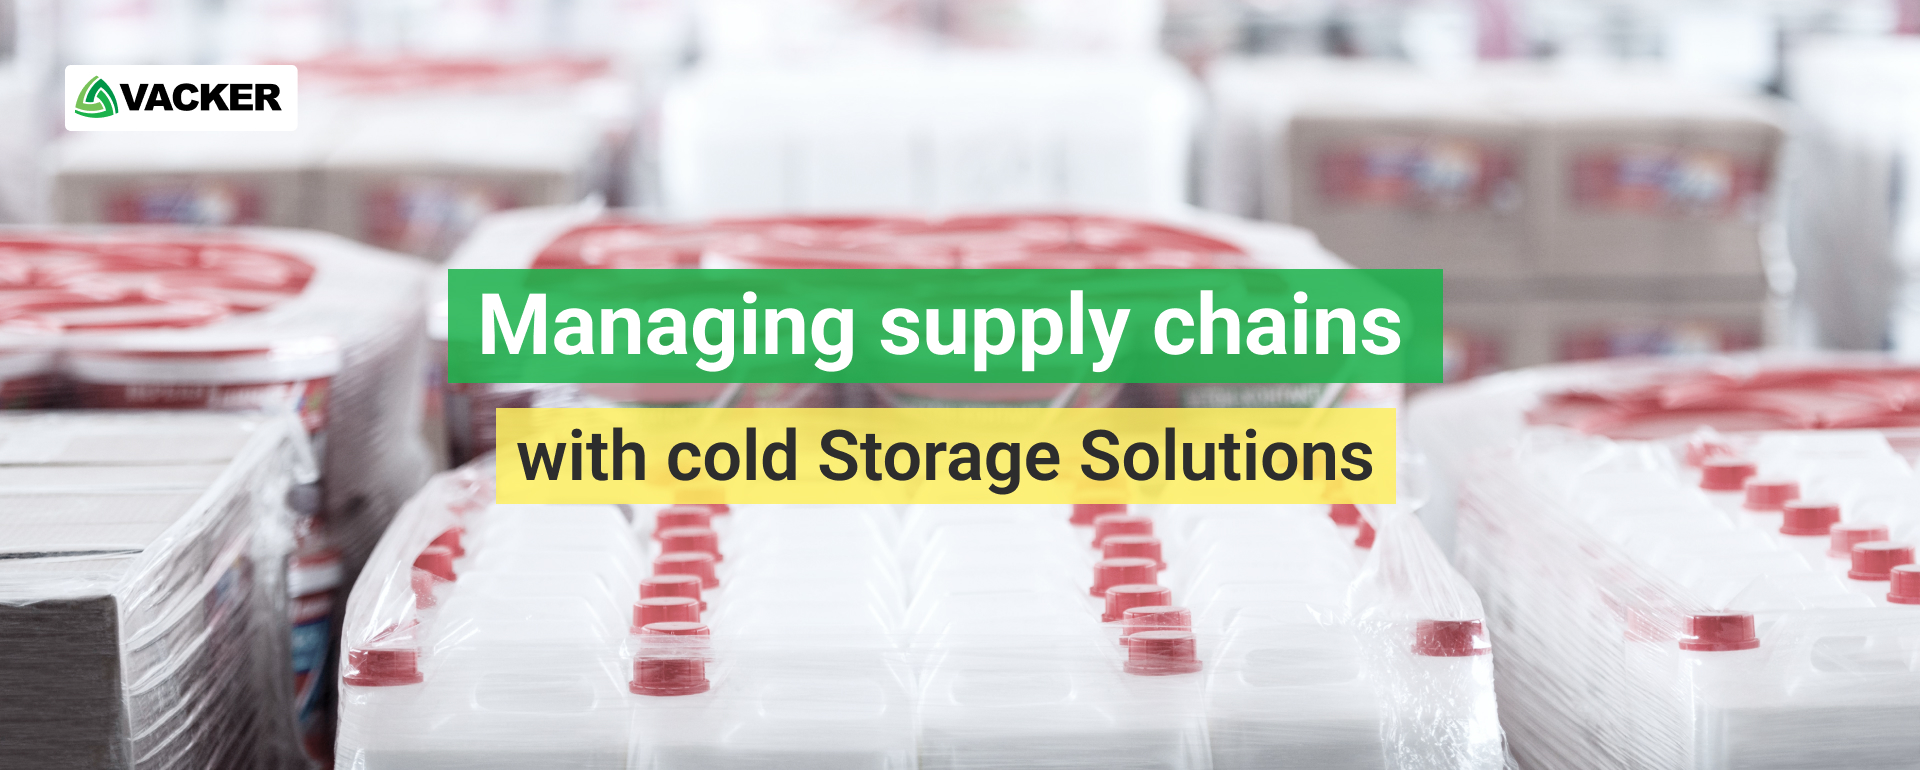 Managing Supply Chains With Cold Storage Solutions